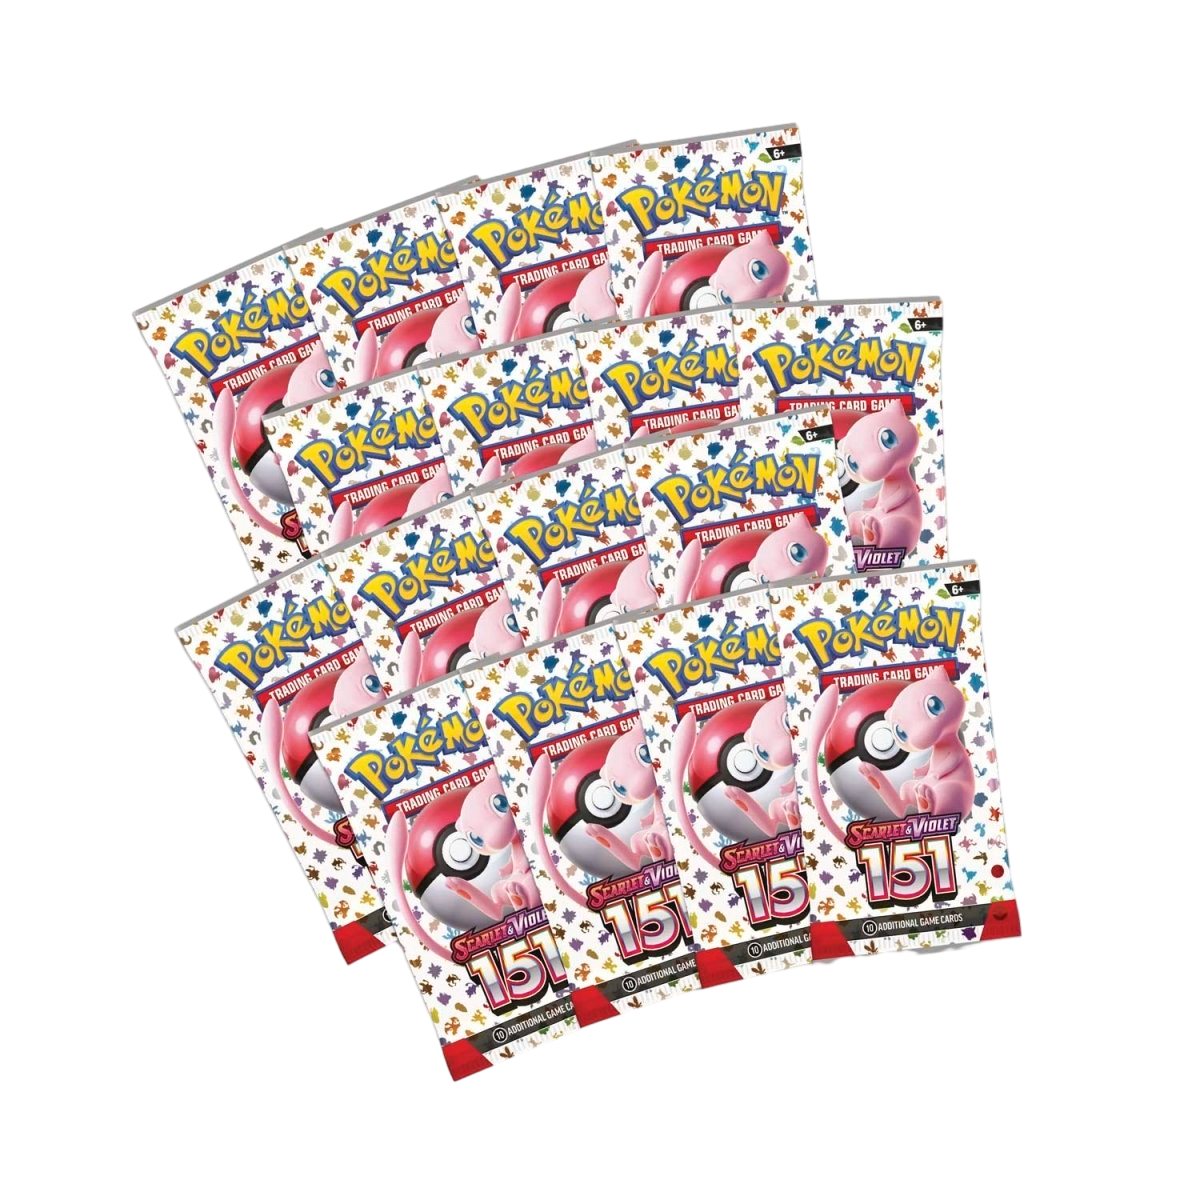 Pokémon TCG: Scarlet & Violet - 151 Collection - Ultra Premium Collection (Order 4 for Factory Sealed Case)